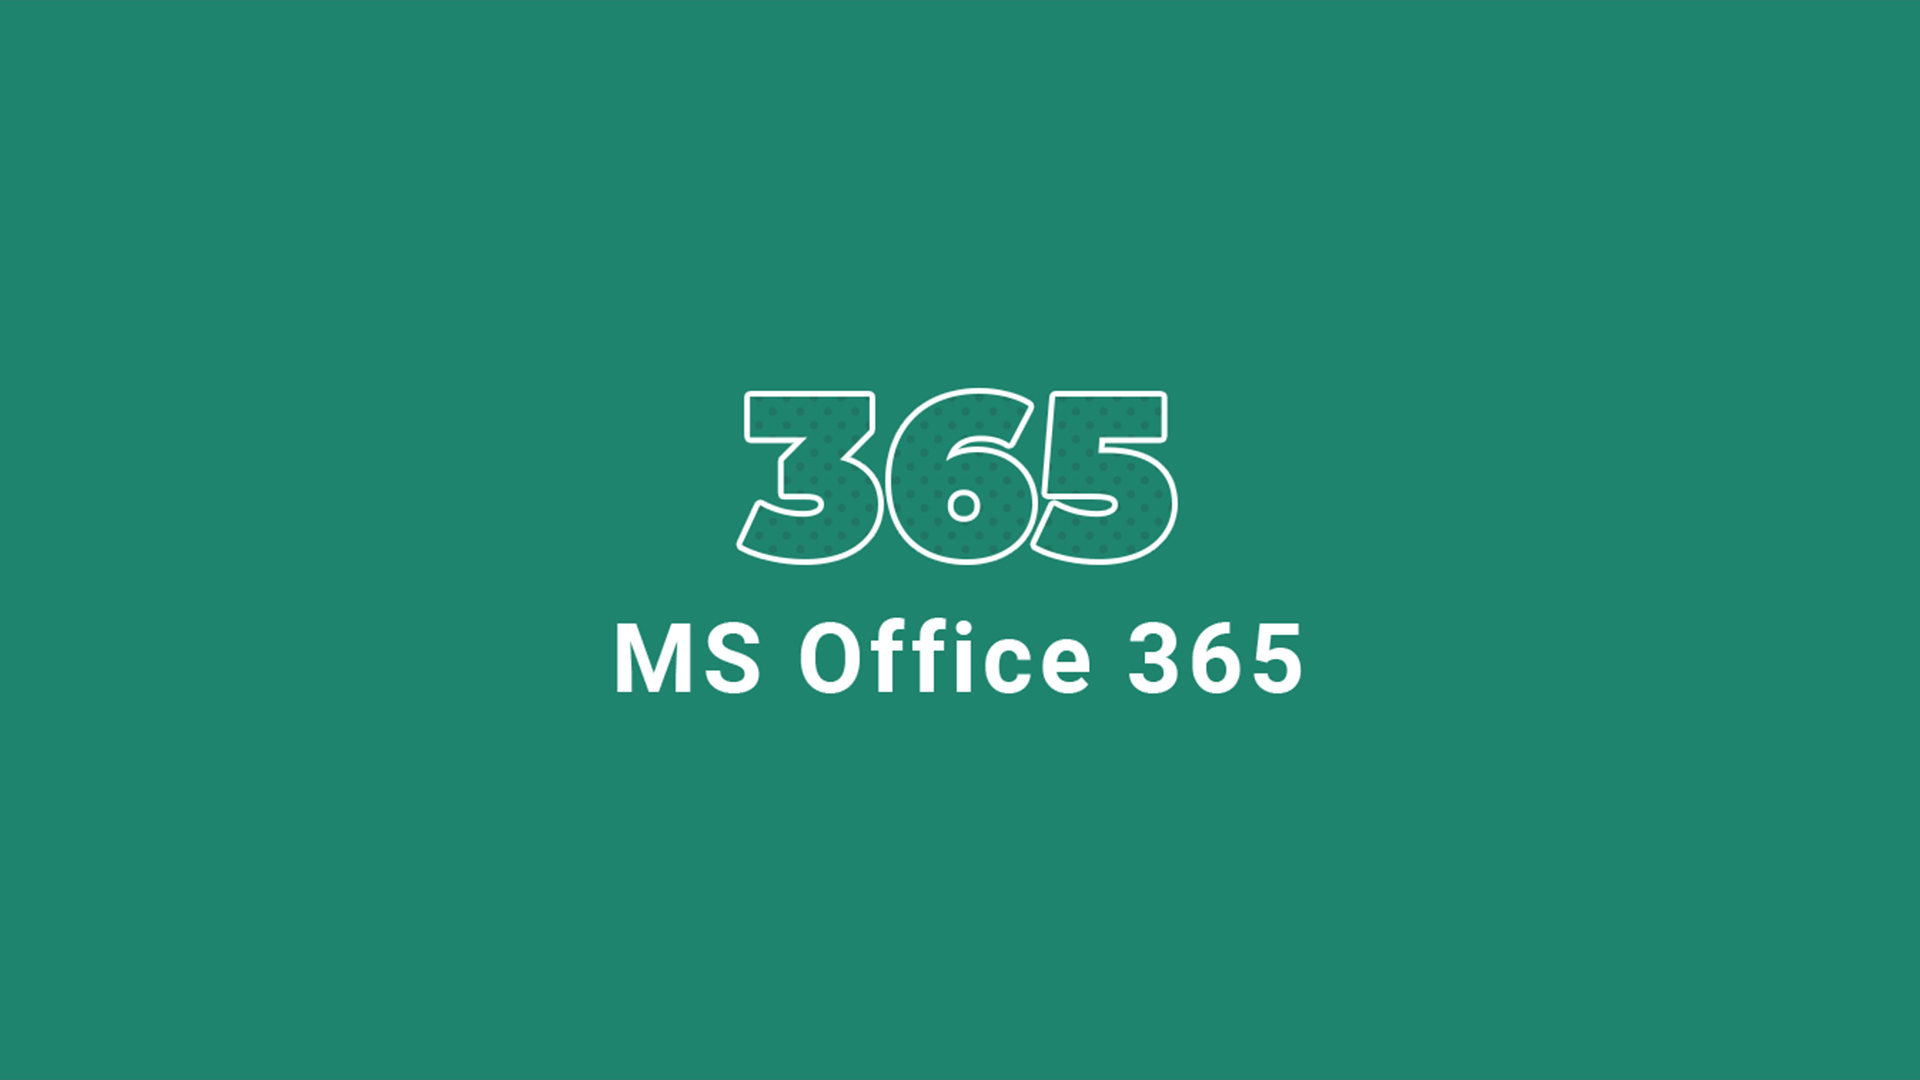 MS Office 365 Family Key (6 Months / 6 Devices), $56.49